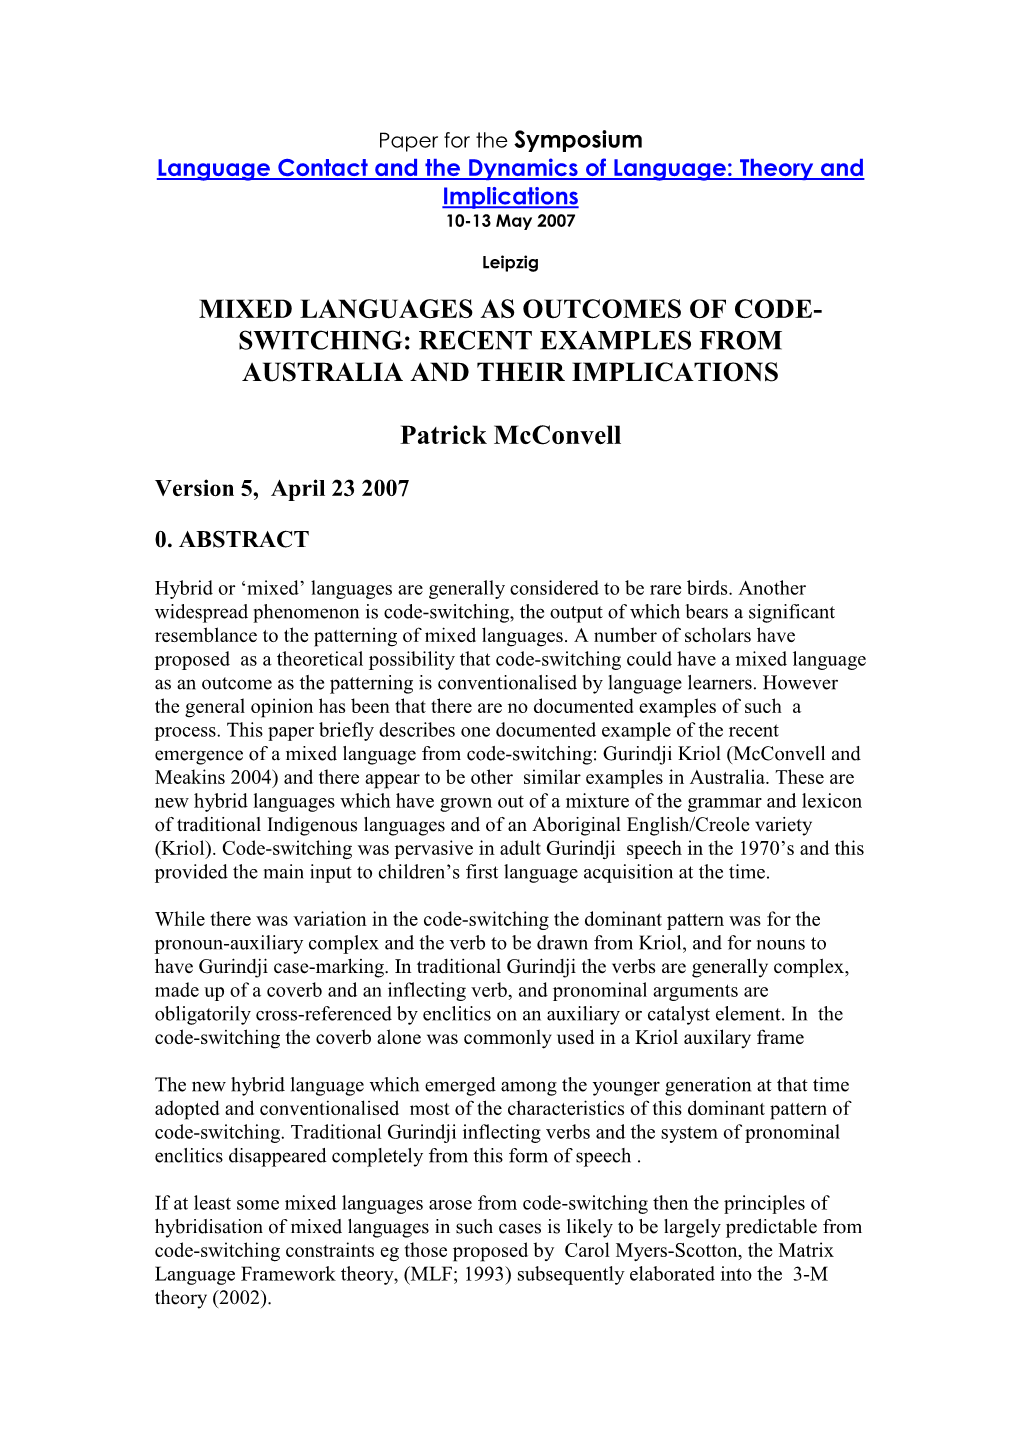 MIXED LANGUAGES AS OUTCOMES of CODE- SWITCHING: RECENT EXAMPLES from AUSTRALIA and THEIR IMPLICATIONS Patrick Mcconvell